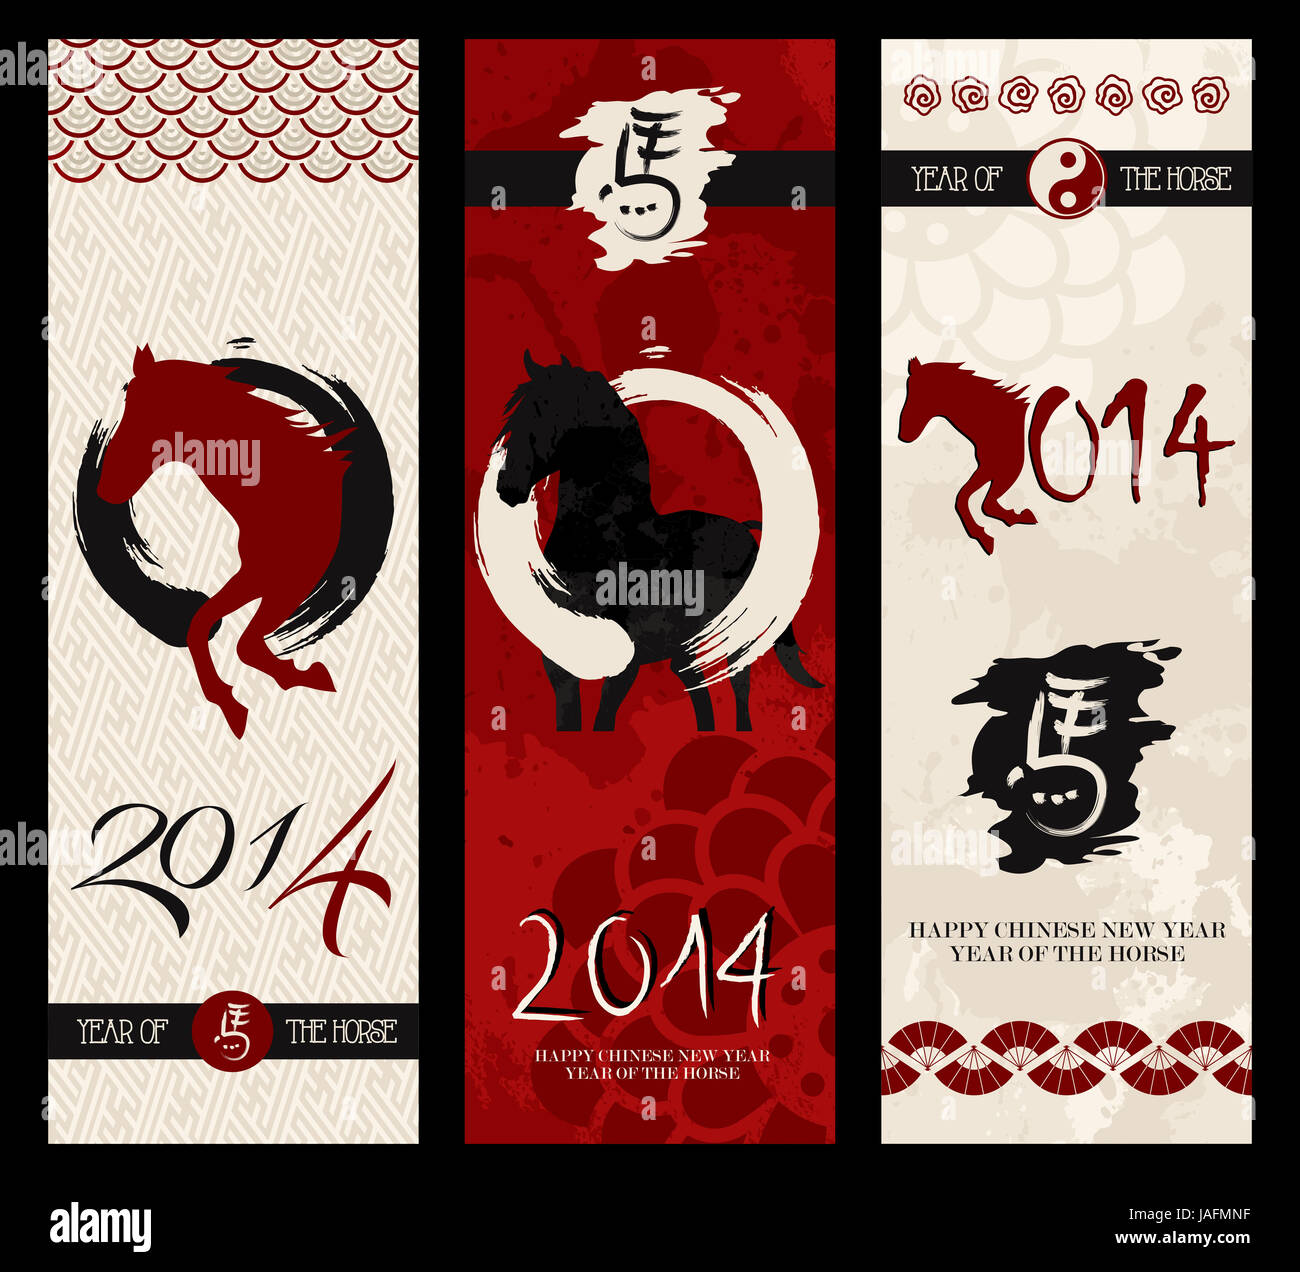 2014 Chinese New Year of the Horse brush style web banners set. Vector file organized in layers for easy editing. Stock Photo